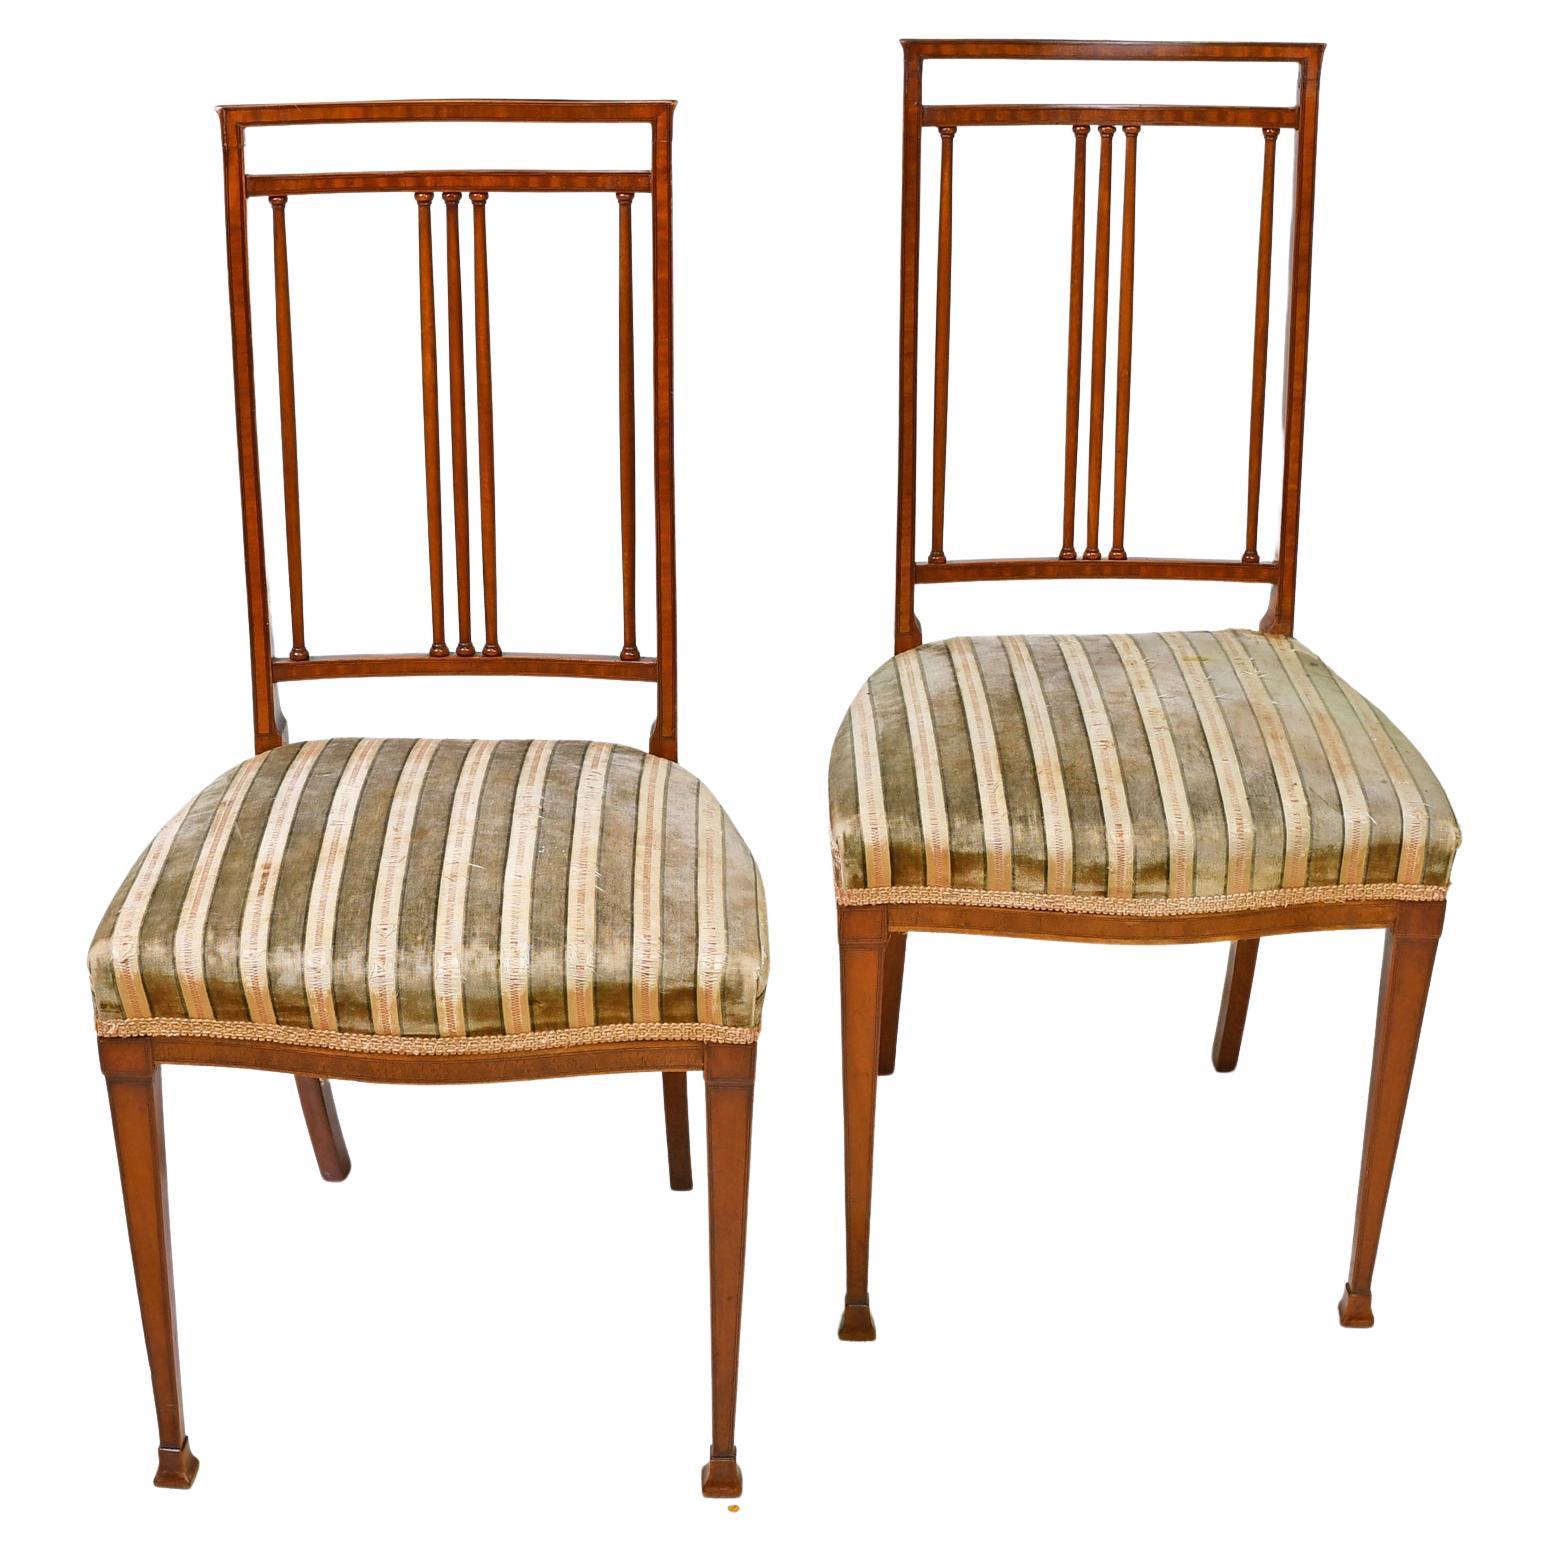 Pair of Antique English Aesthetic Movement Side Chairs with Upholstered Seats For Sale